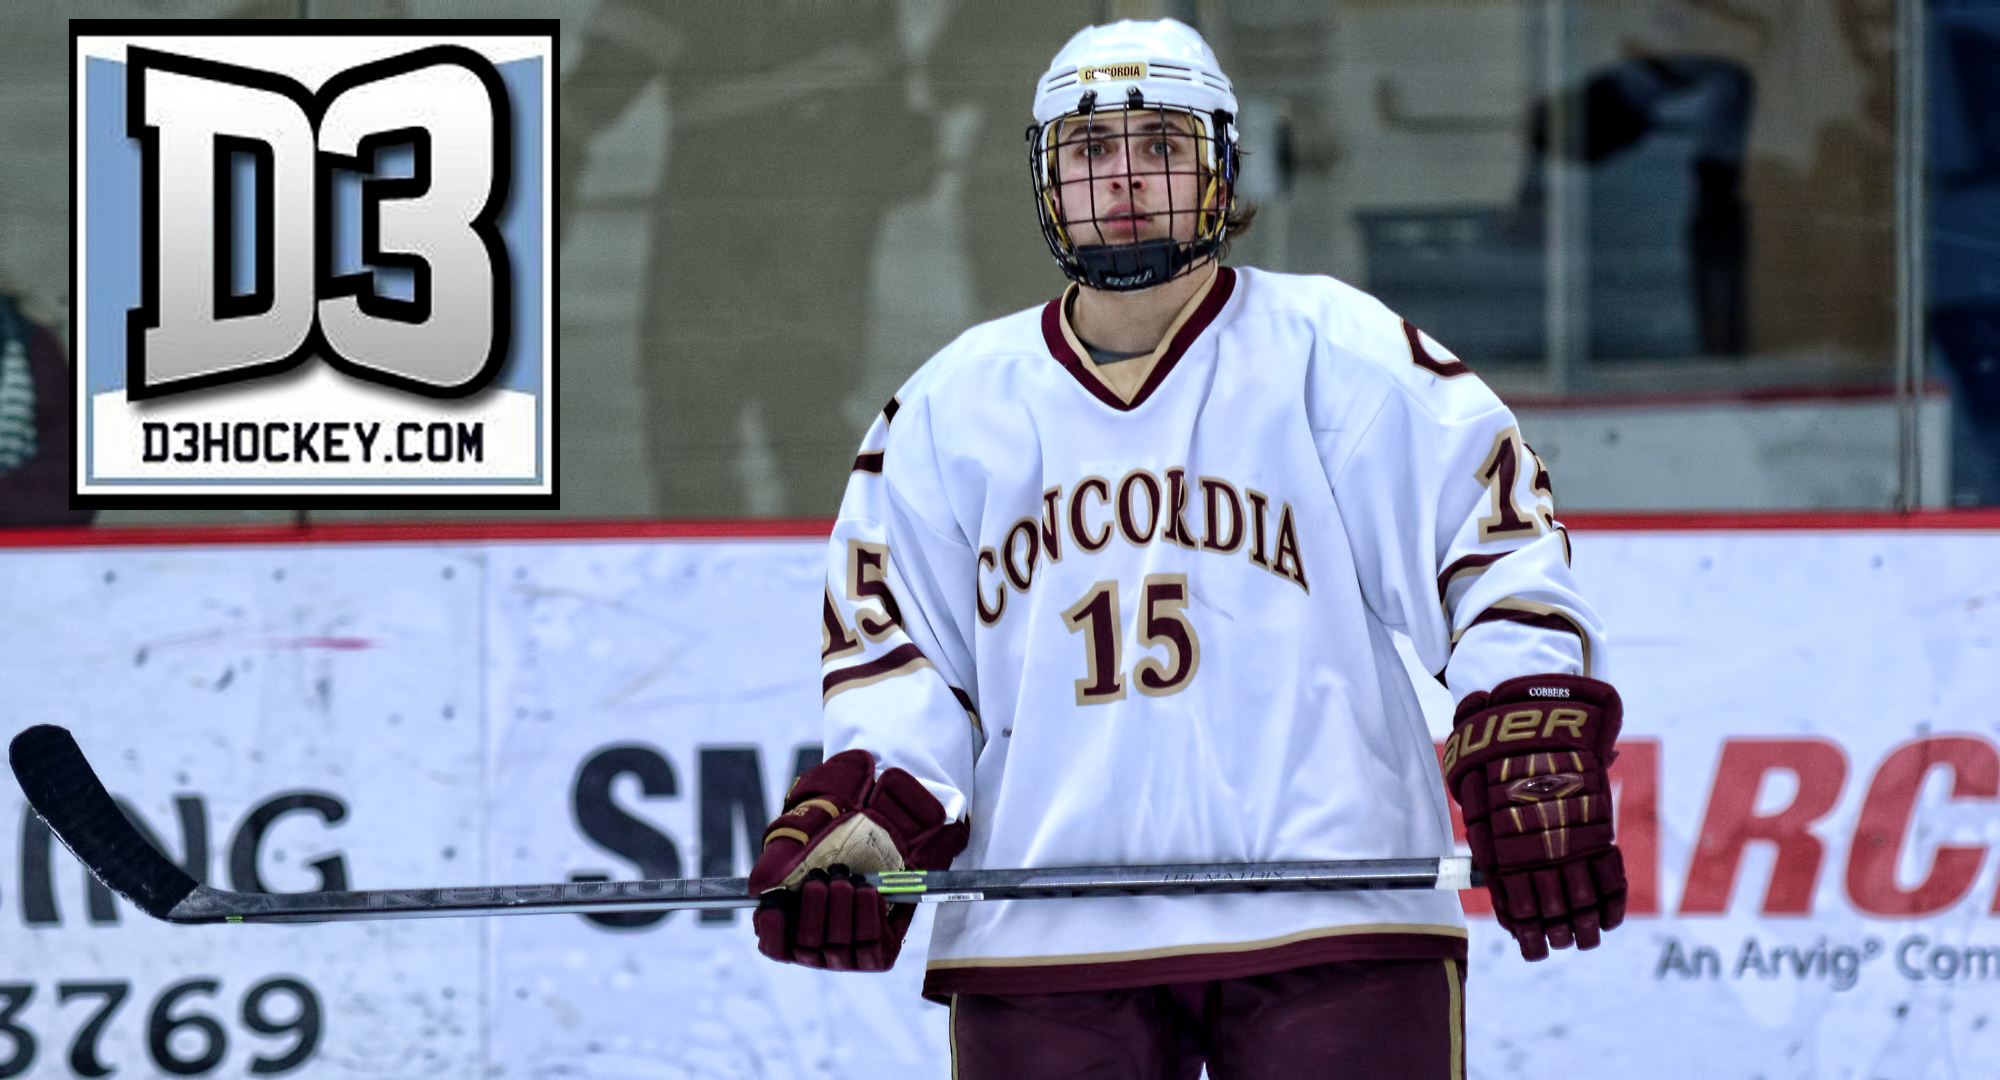 Mario Bianchi was named to the D3hockey.com Team of the Week.